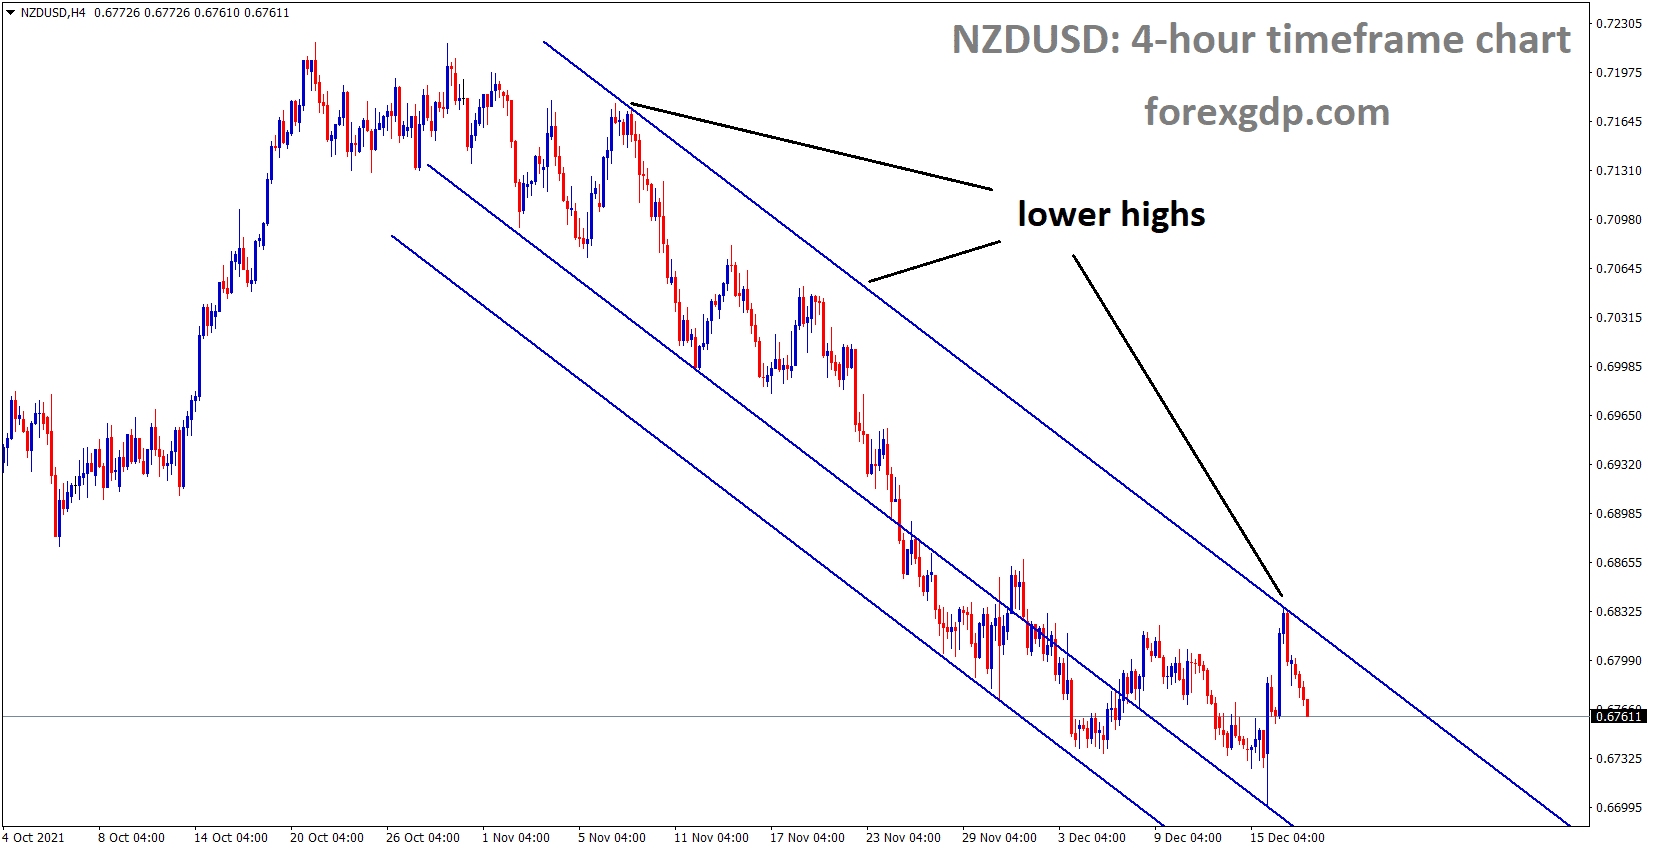 NZDUSD is moving in the Descending channel and the market fell from the lower high area of the channel 1